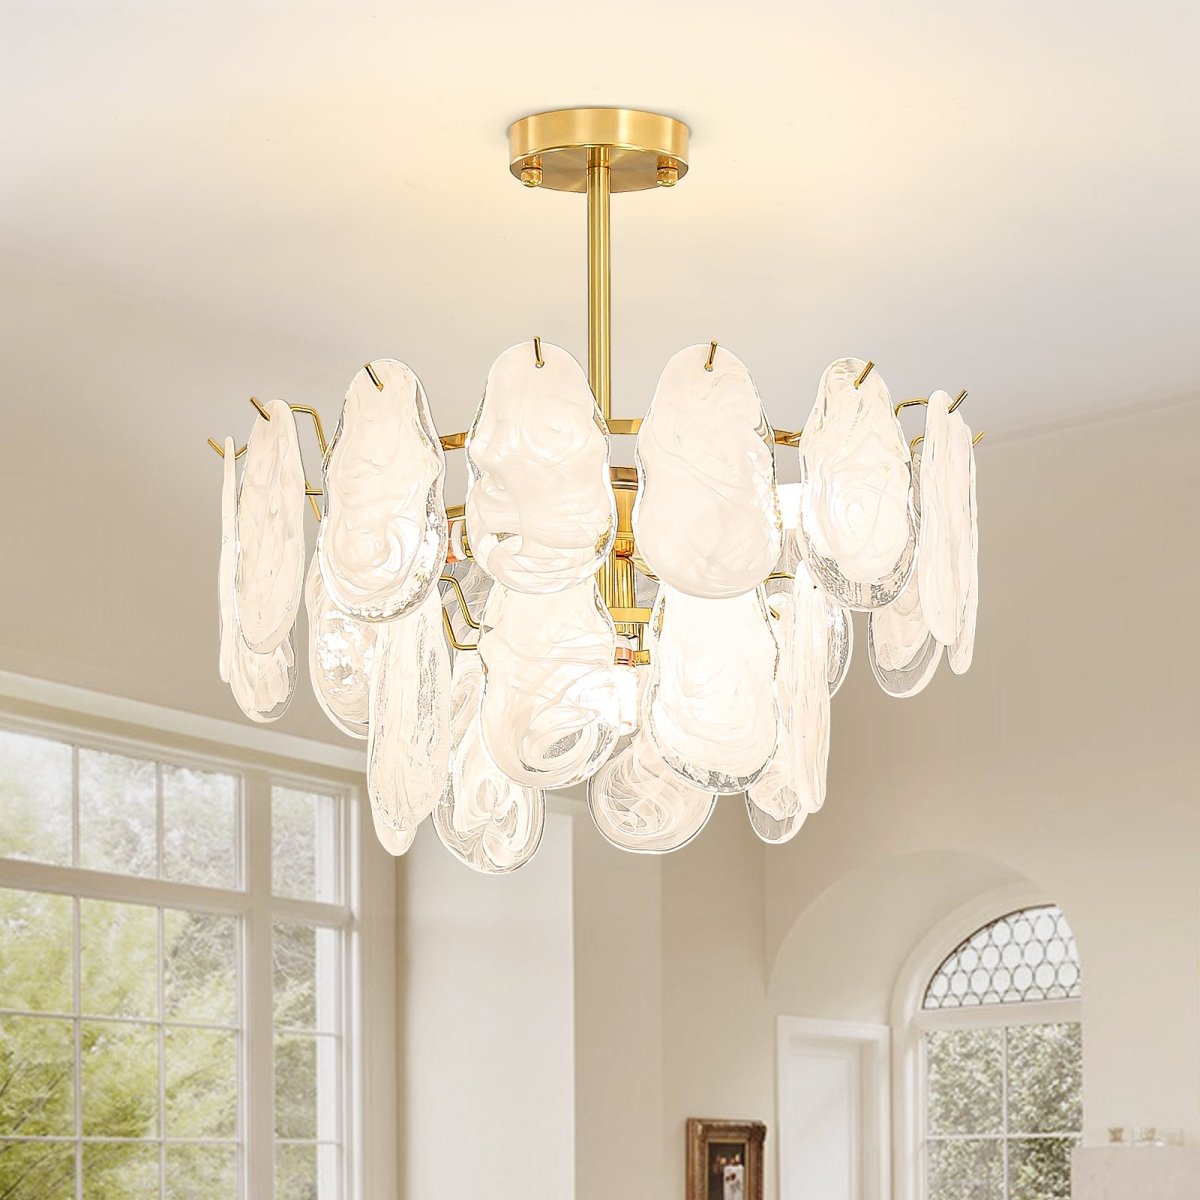 16 Inch French Cloud Glass Chandelier, 4-Light Modern Semi Flush Mount Ceiling Light, Crystal Chandelier with 2-Tire Cloud Glass Lampshade for Bedroom, LED Bulbs Included - WS-FPC53-D400-4C2 1 | DEPULEY